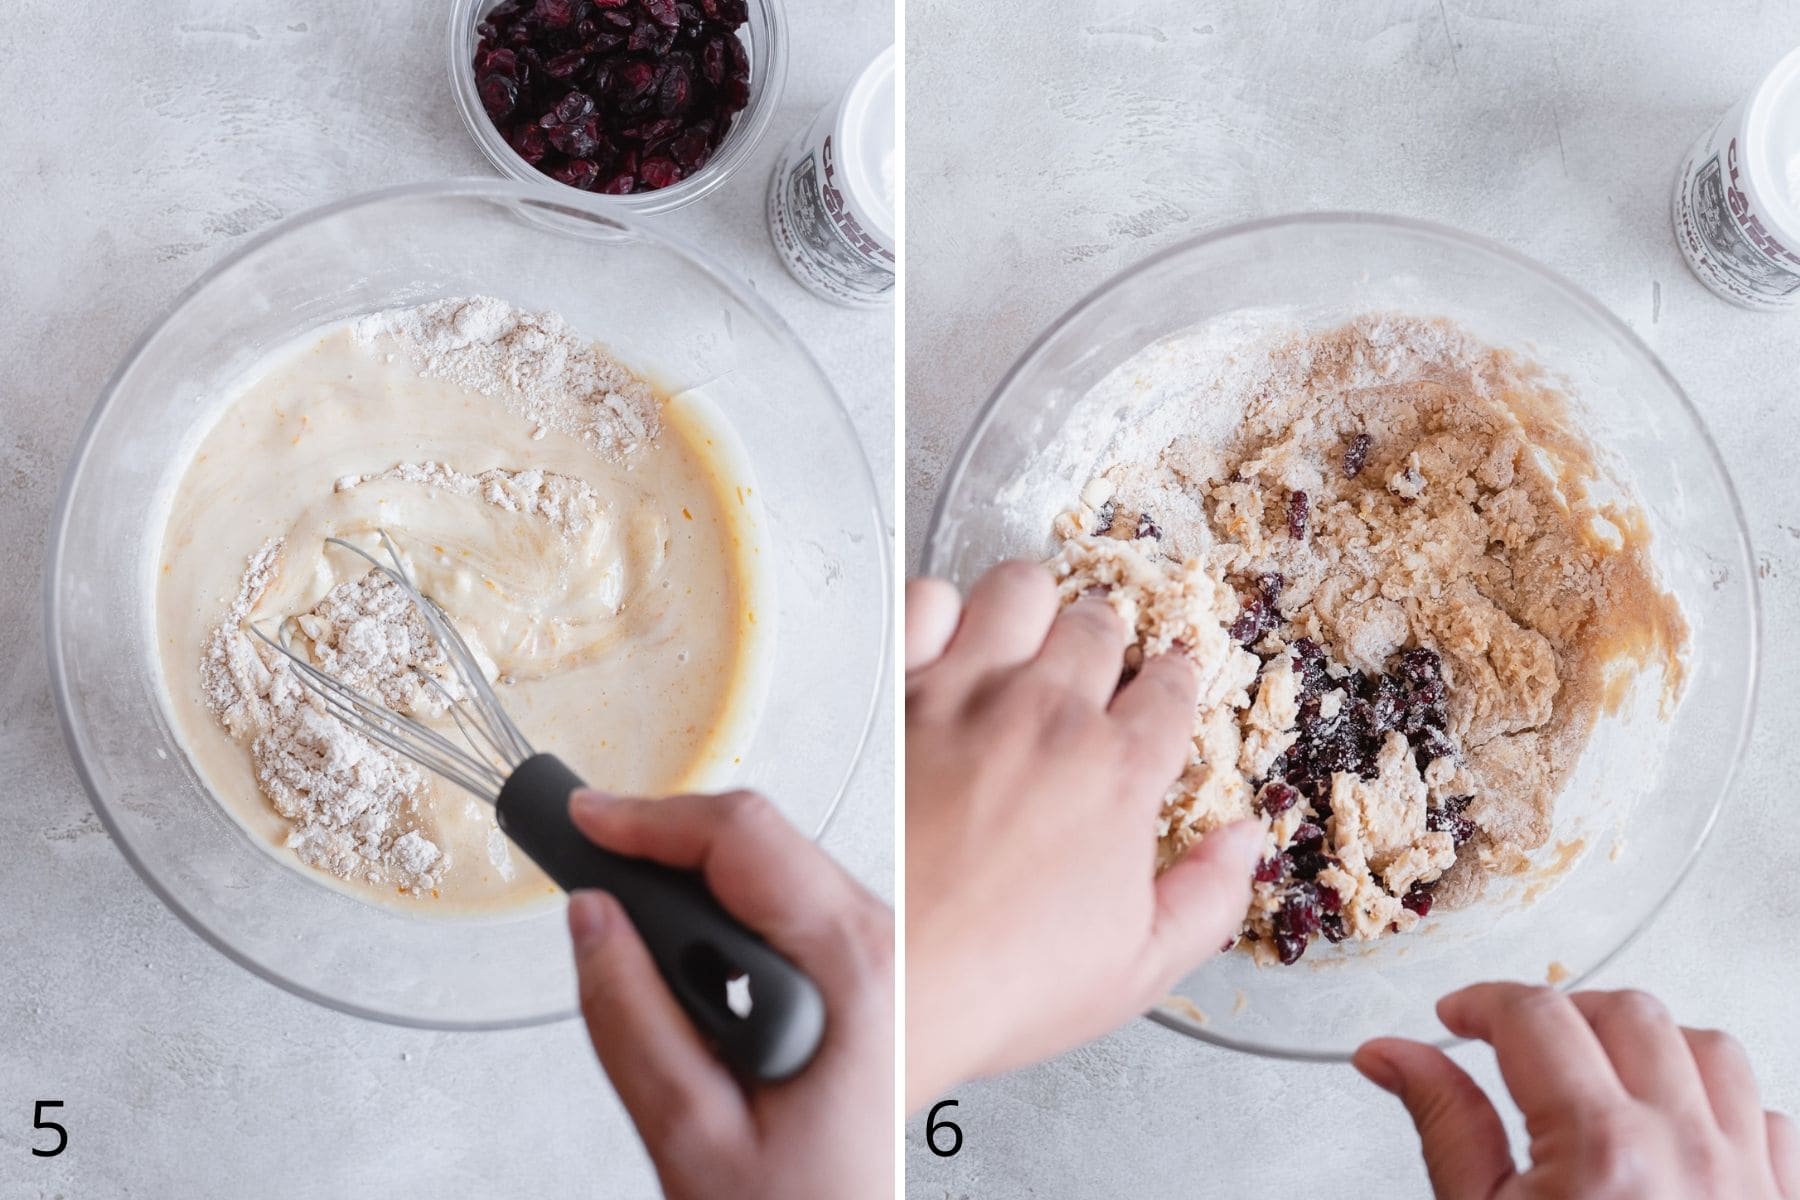 steps 5 and 6 of making scones